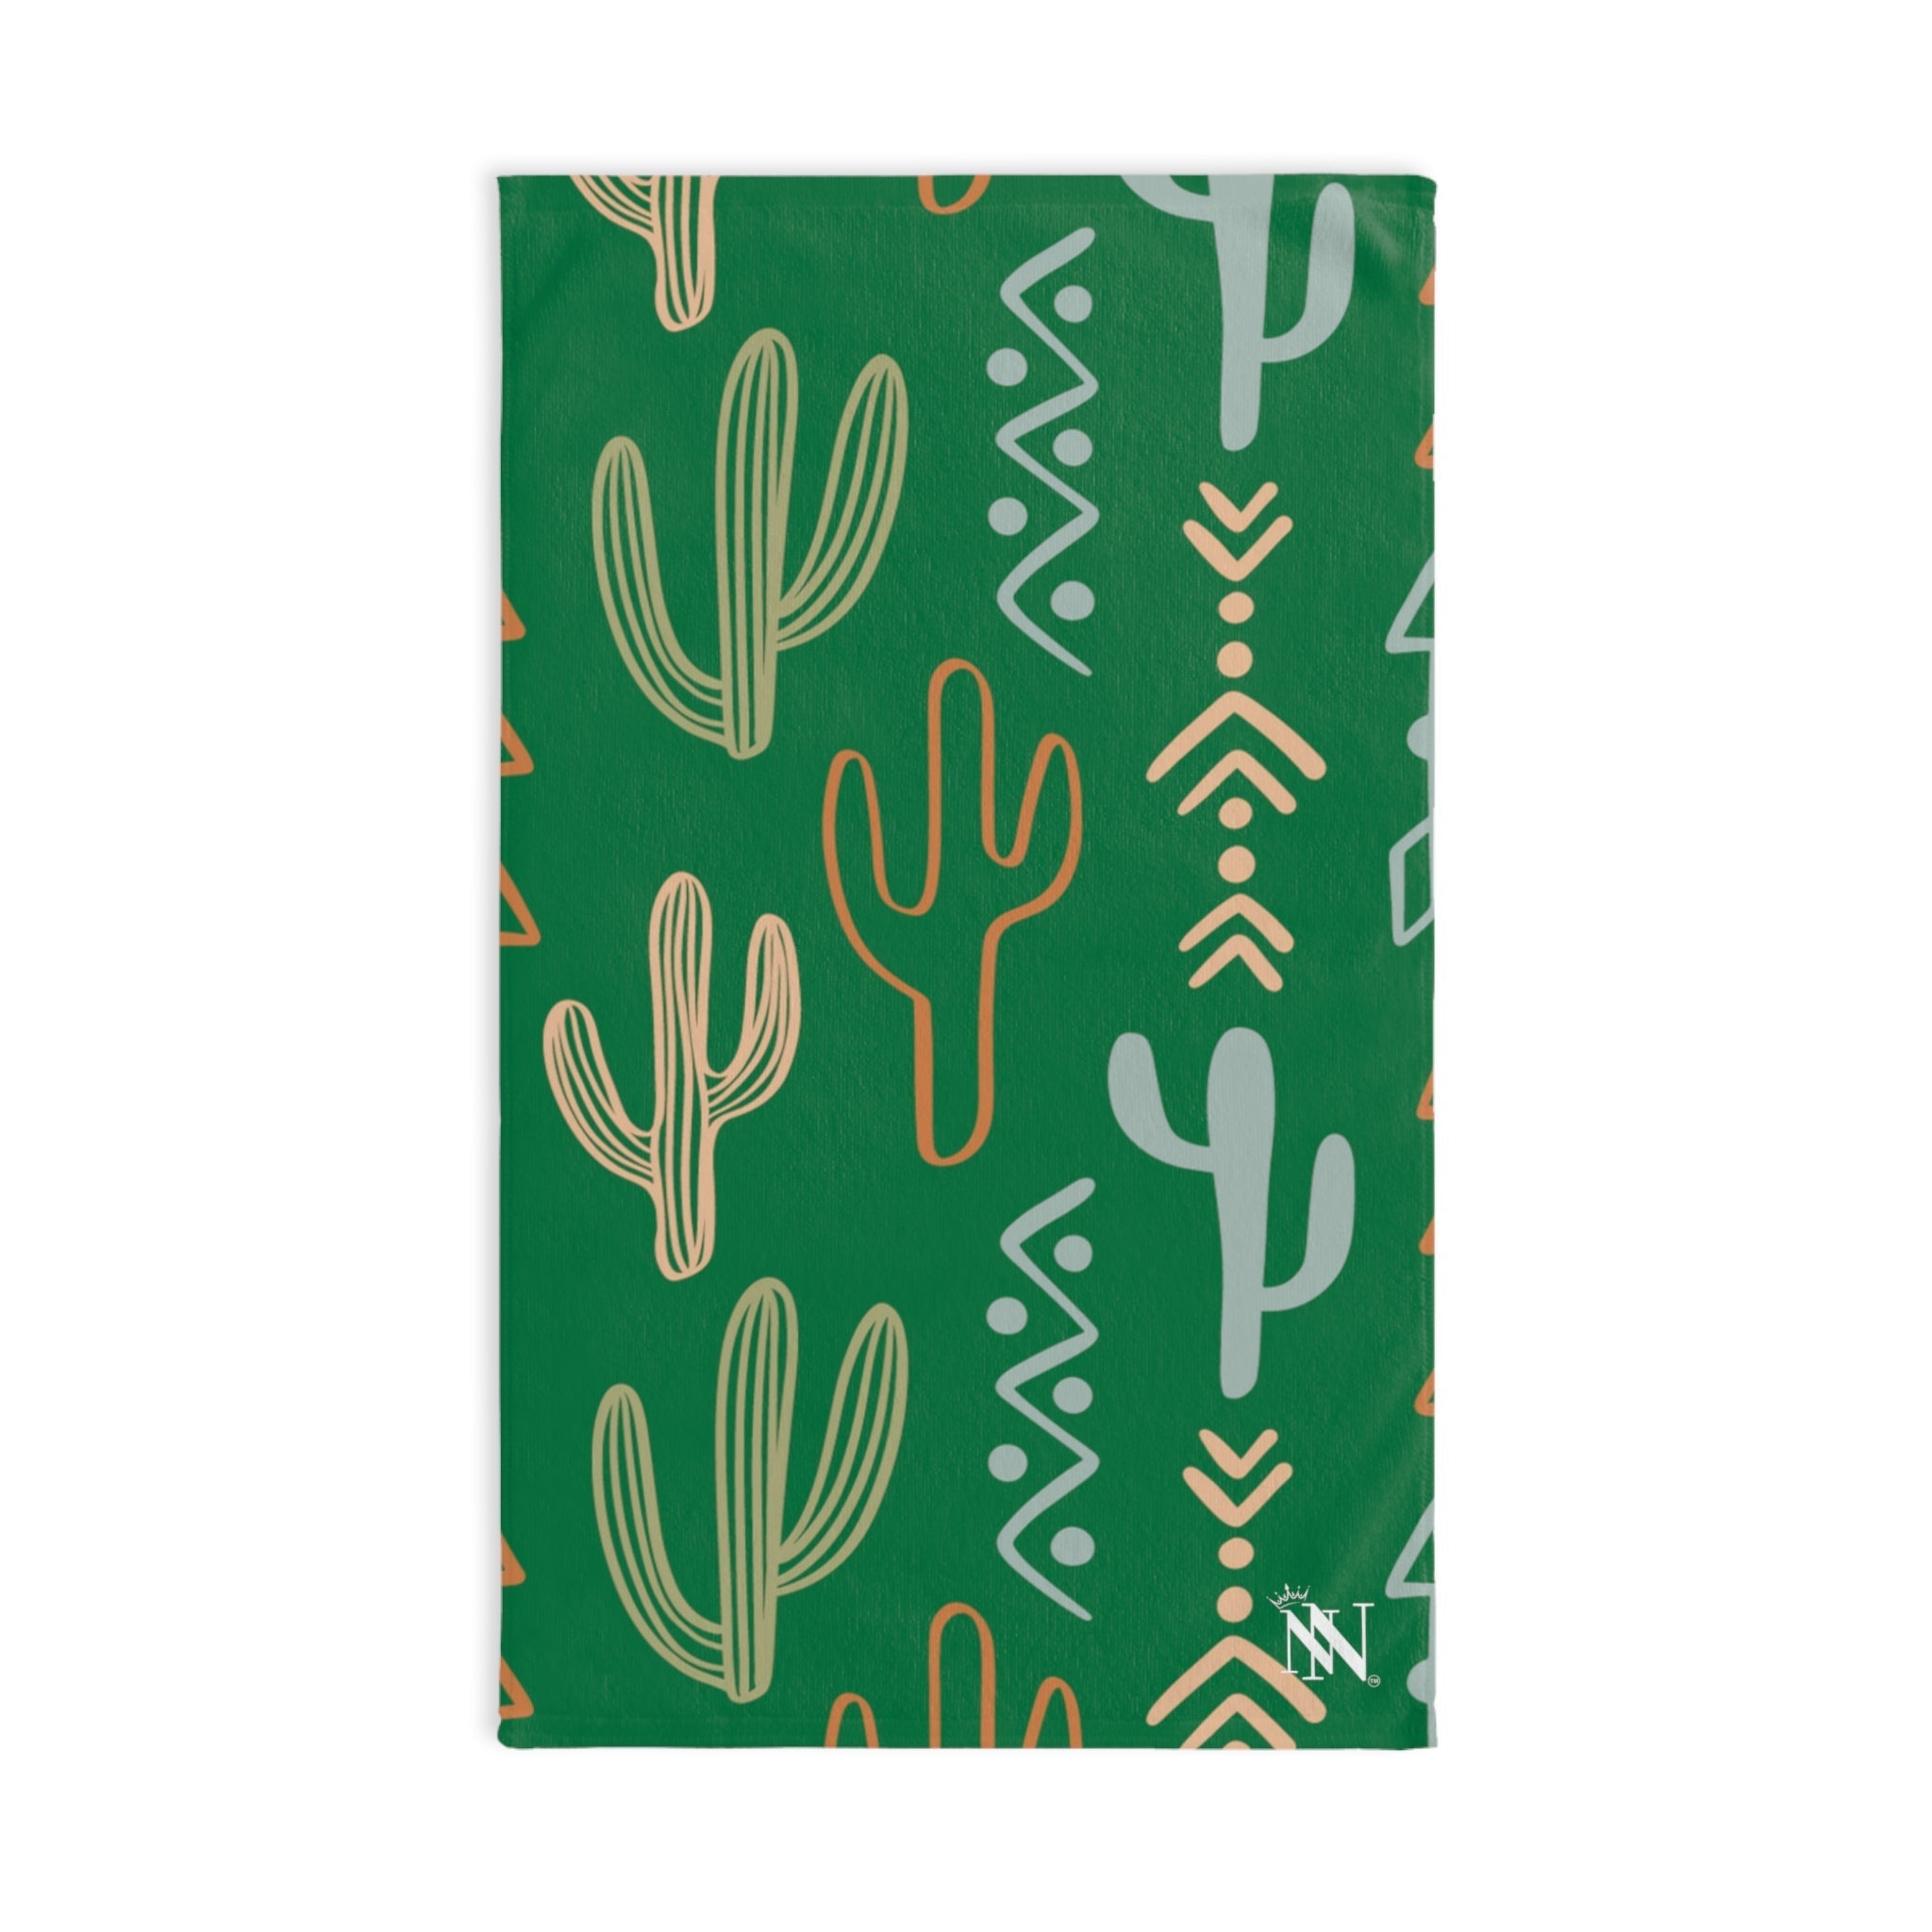 Cactus Western | Gifts for Boyfriend, Funny Towel Romantic Gift for Wedding Couple Fiance First Year Anniversary Valentines, Party Gag Gifts, Joke Humor Cloth for Husband Men BF NECTAR NAPKINS